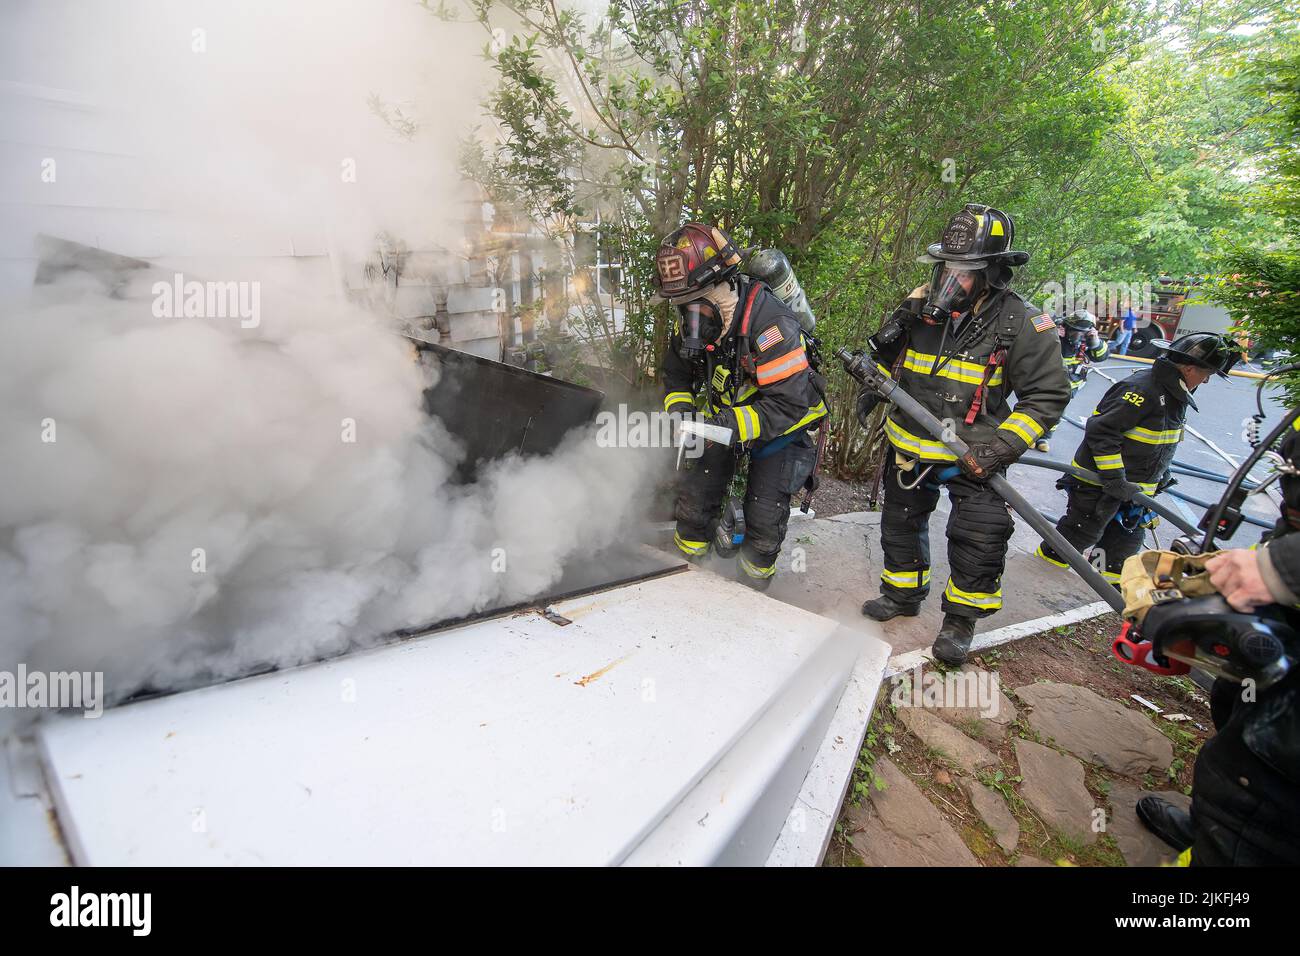 East Hampton firefighters prepare to enter the basement through a Bilco door as at 5:57 a.m. on Friday, May 14th, 2021, the East Hampton Fire Departme Stock Photo